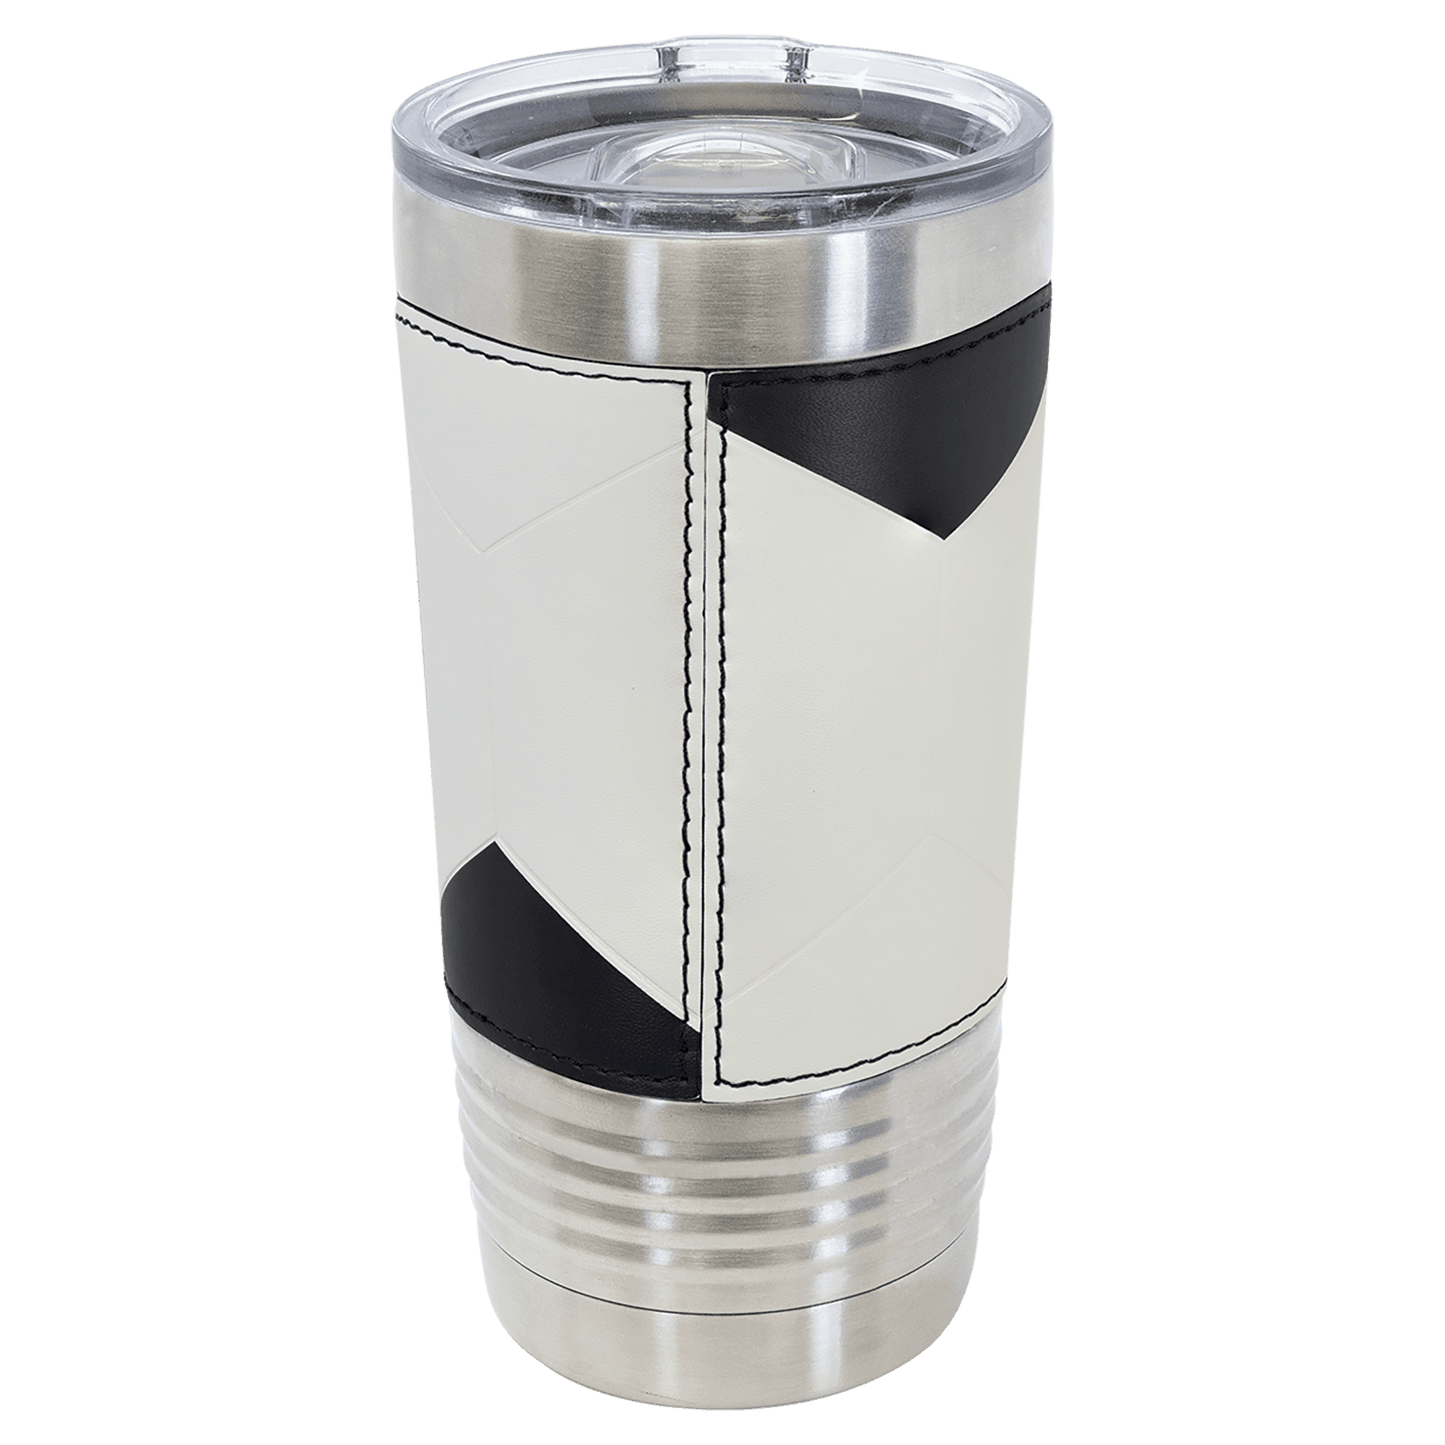 Personalized Soccer Coach 20 oz Engraved Stainless Steel Tumbler